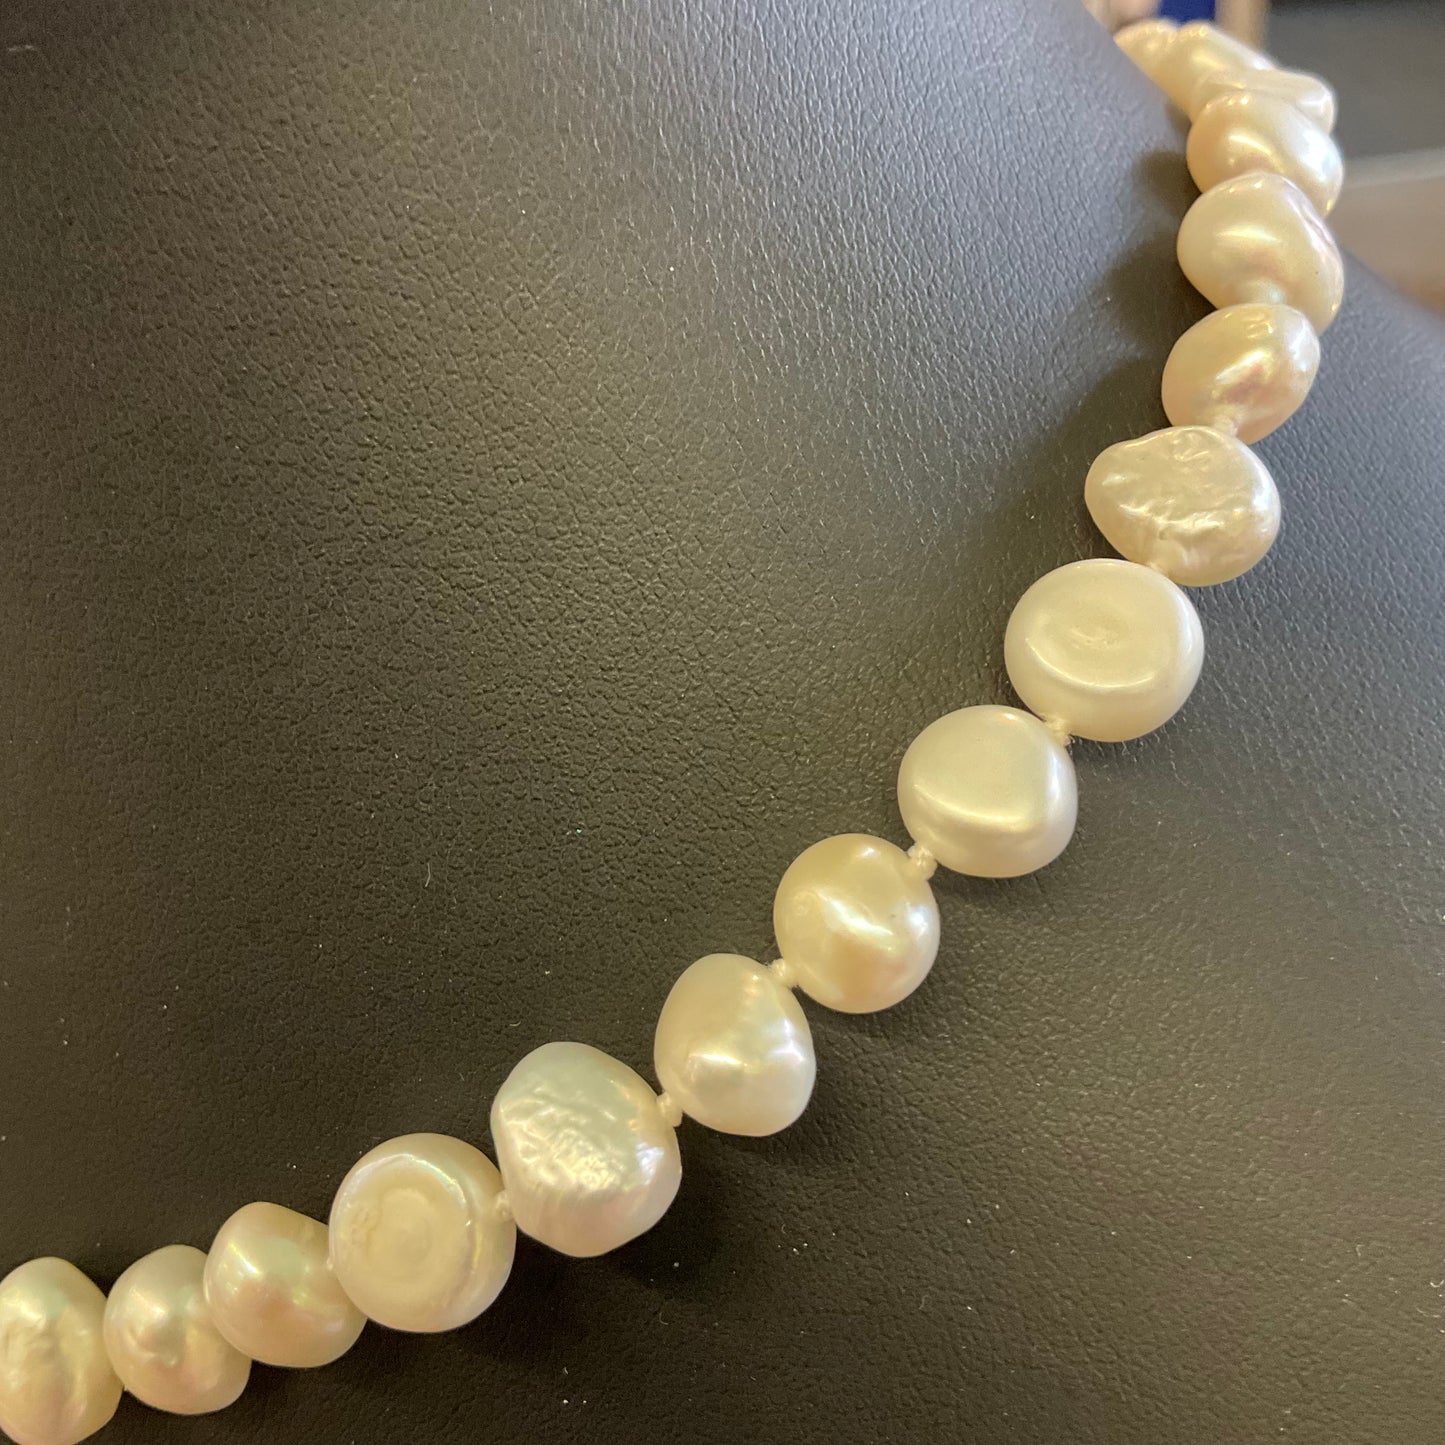 Vintage Ivory/white Fresh water pearl beaded necklace with silver (1120) clasp, wedding, prom, Gift for her.